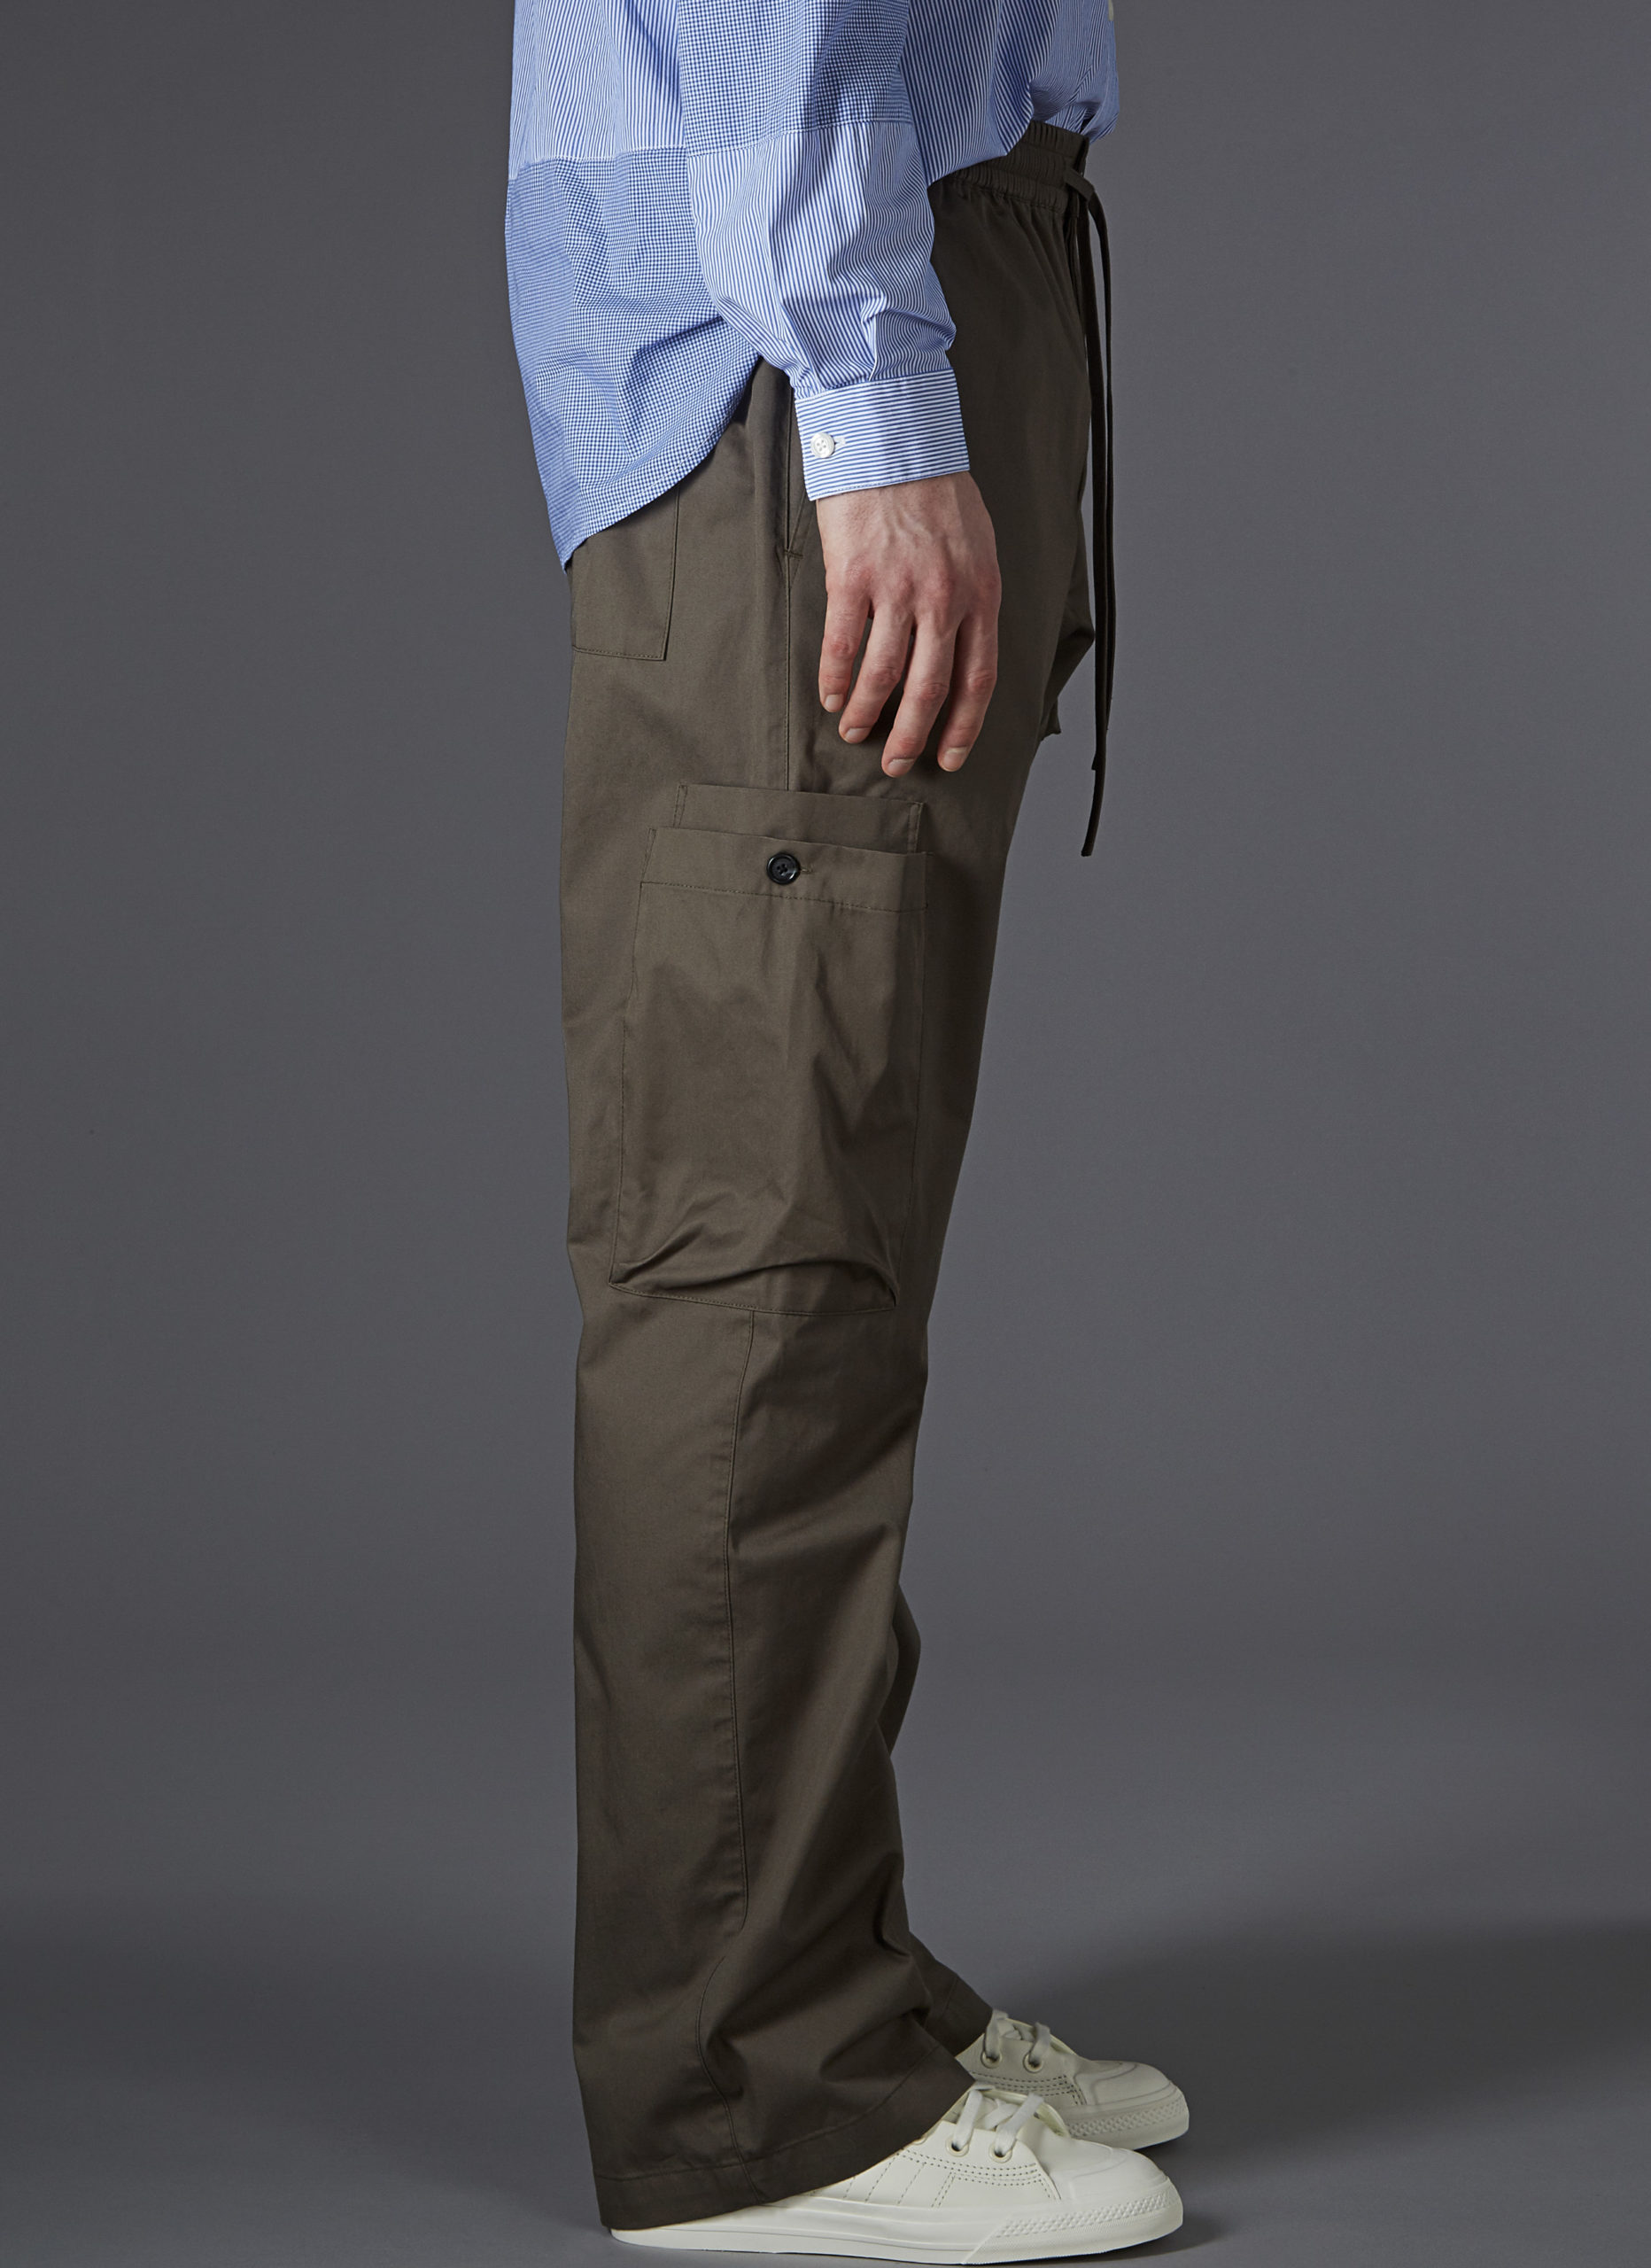 RELAXED UTILITY PANT IN DARK SAGE - GREI New York